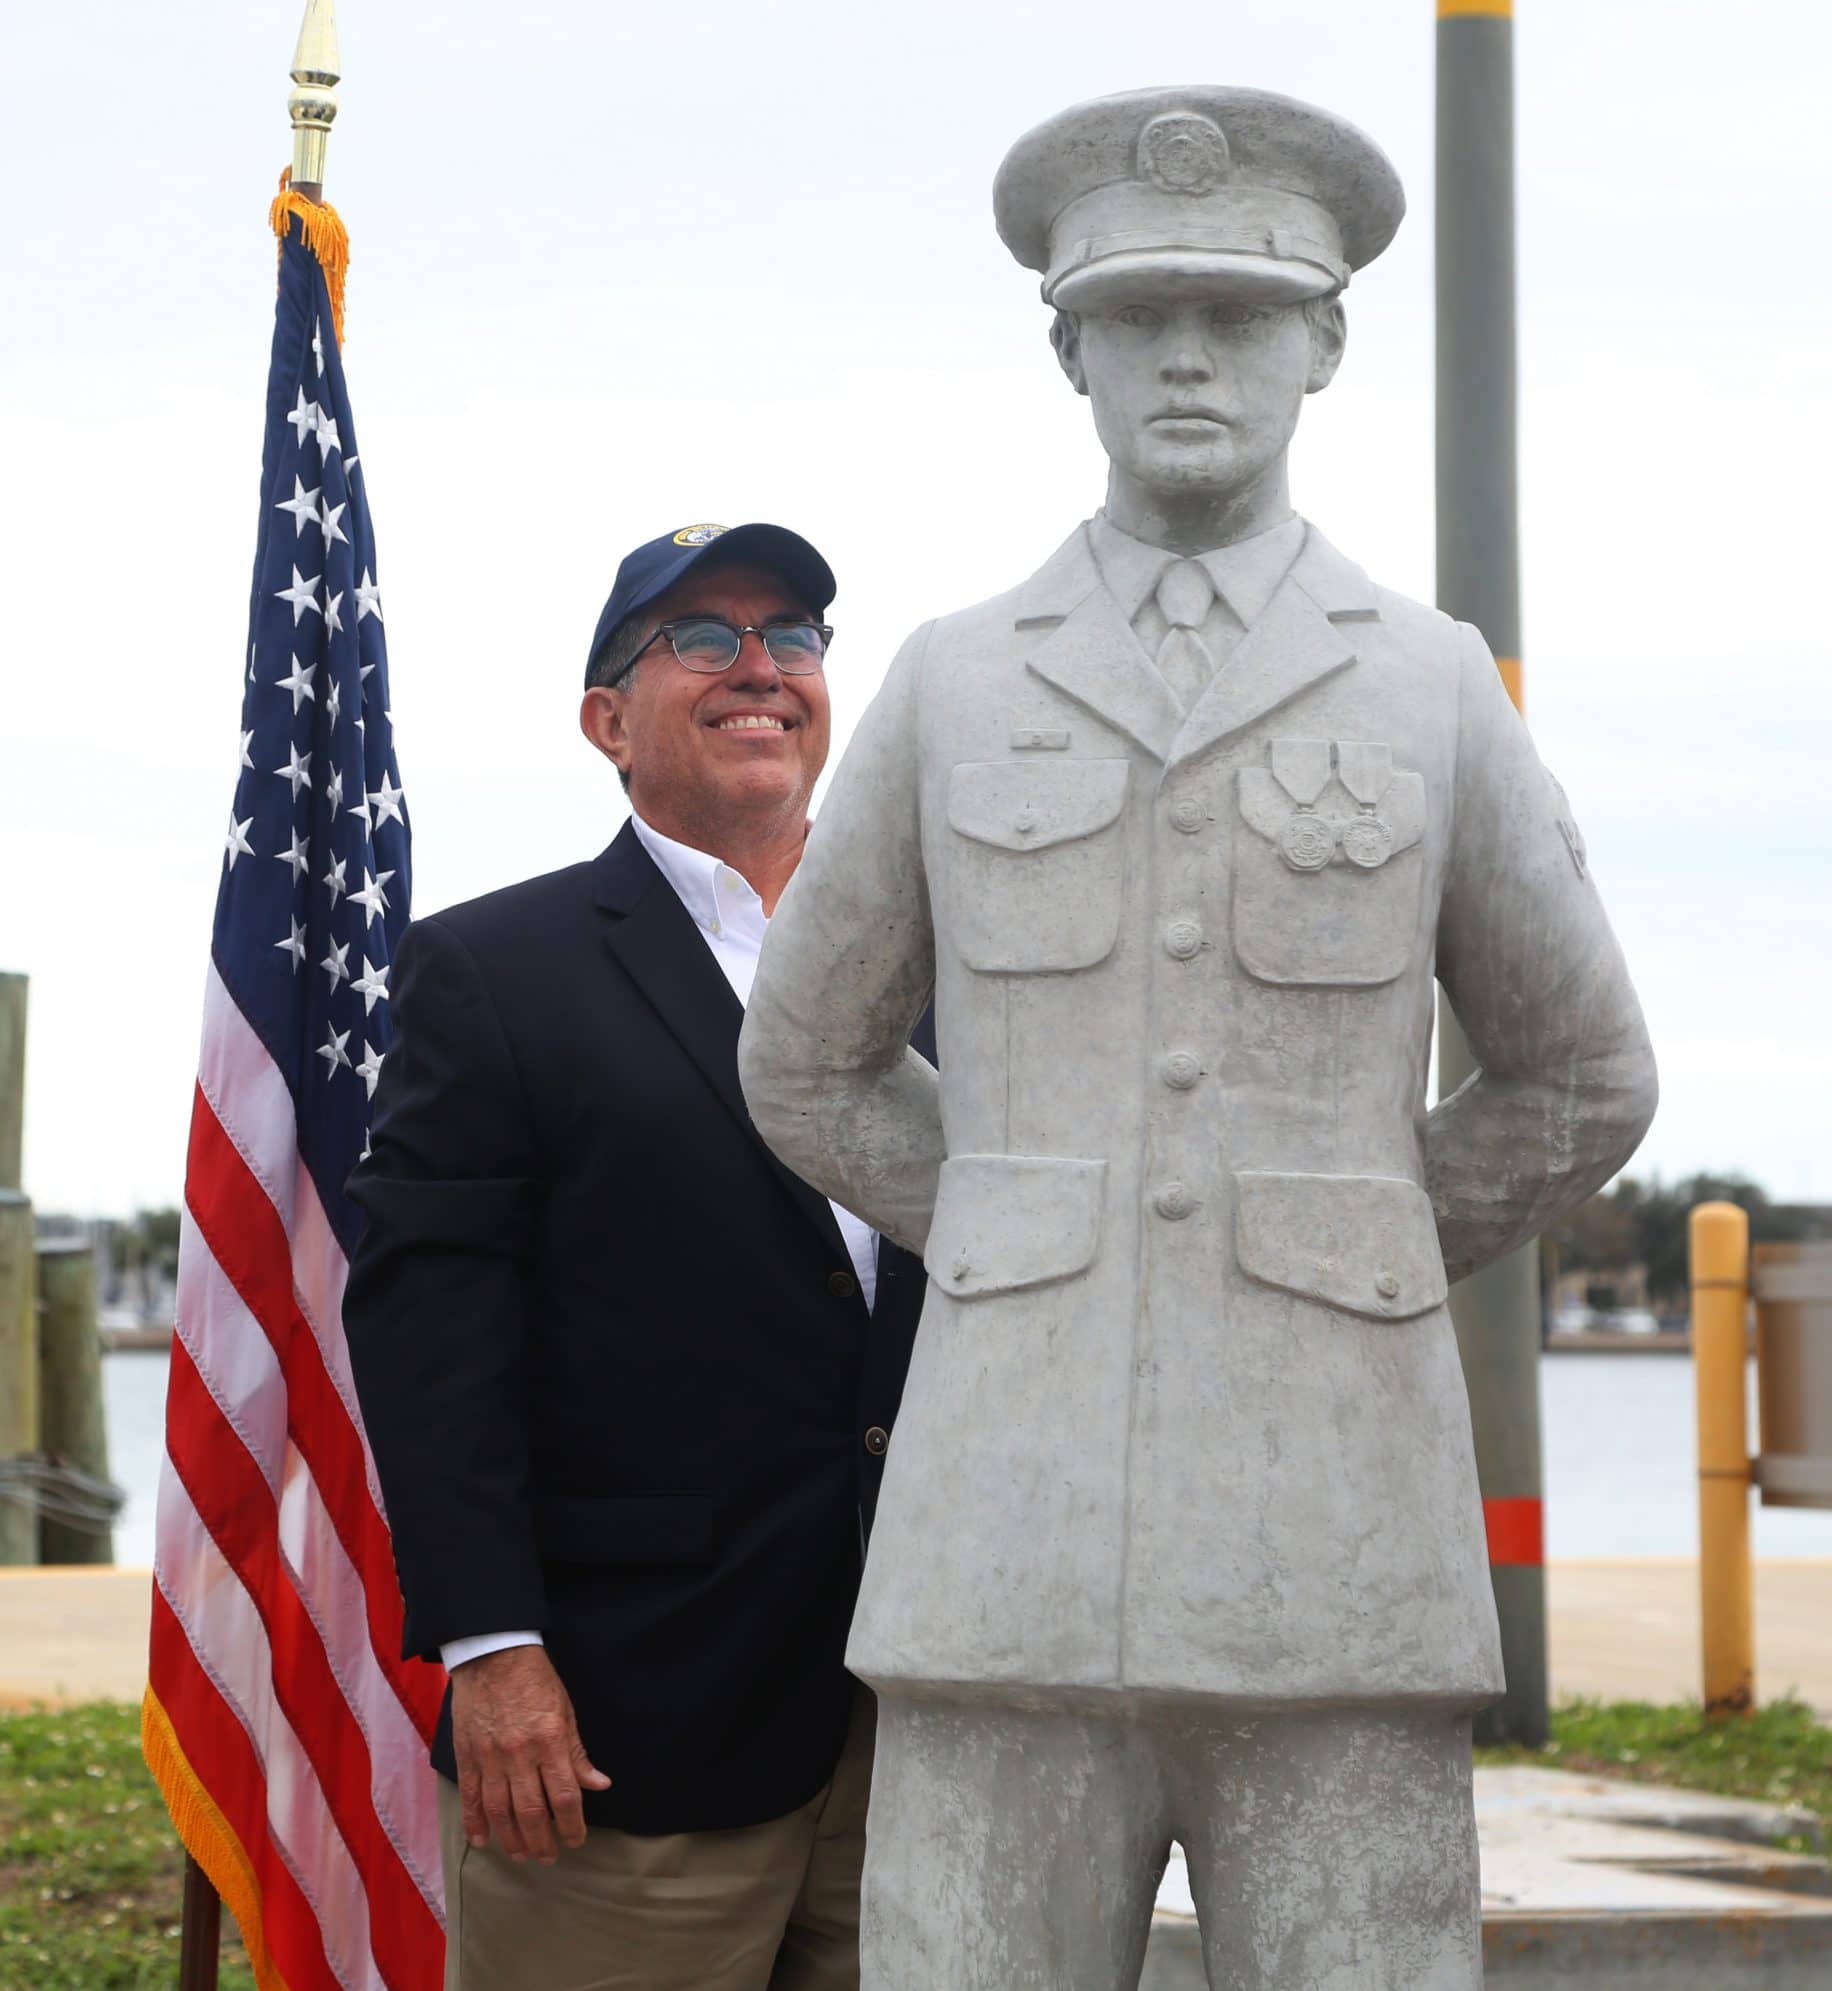 A 1980 Coast Guard disaster killed 23 in Tampa Bay. Here’s one hero’s ...